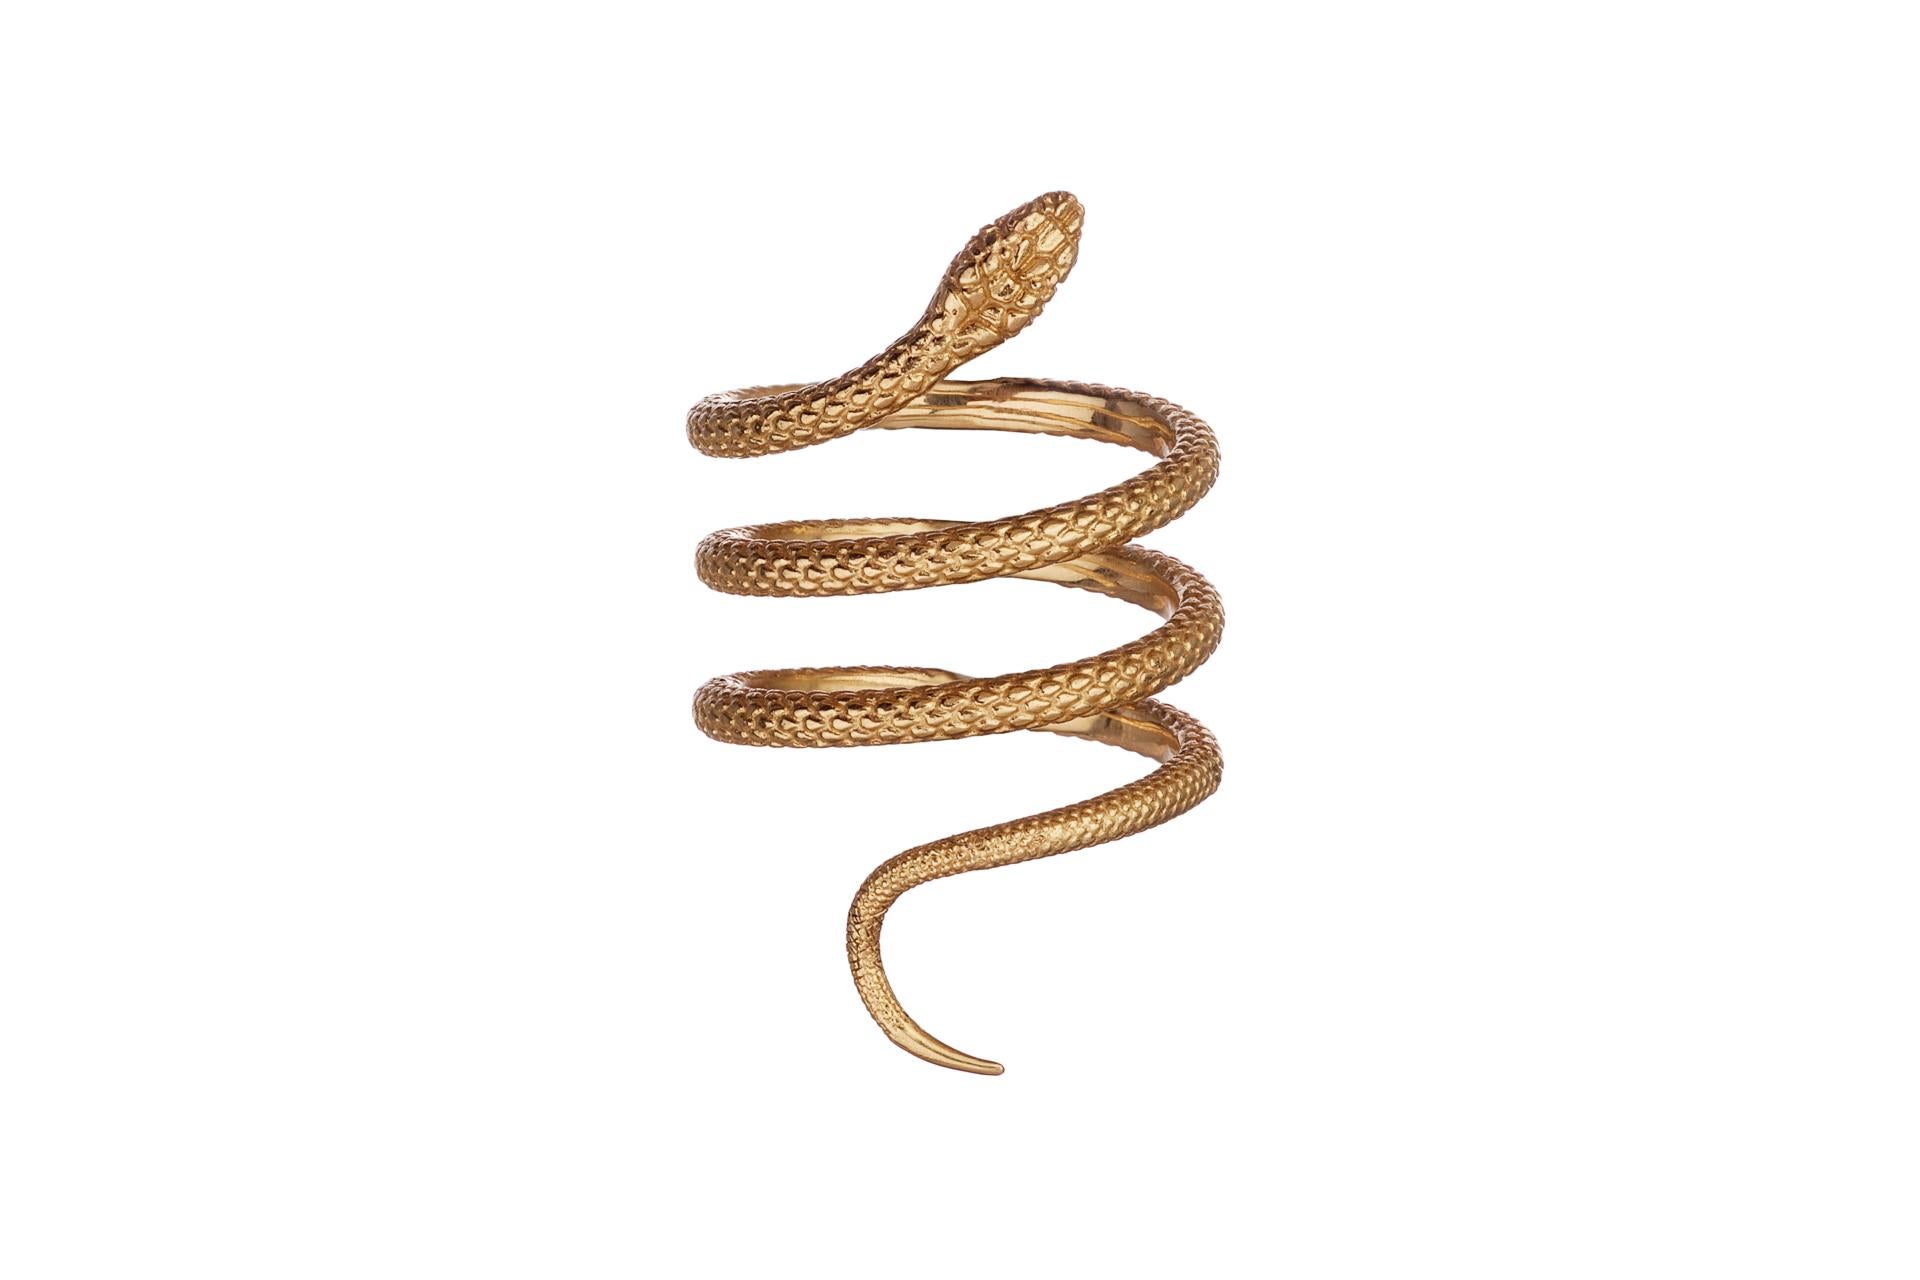 Ouroboros rose gold, white gold and yellow gold snakes that screw together as pairs to be worn as one or can be worn separately. #thesexysixtyniner. One on each hand, two on one hand, one on one's hand and one on another's hand - any which way is